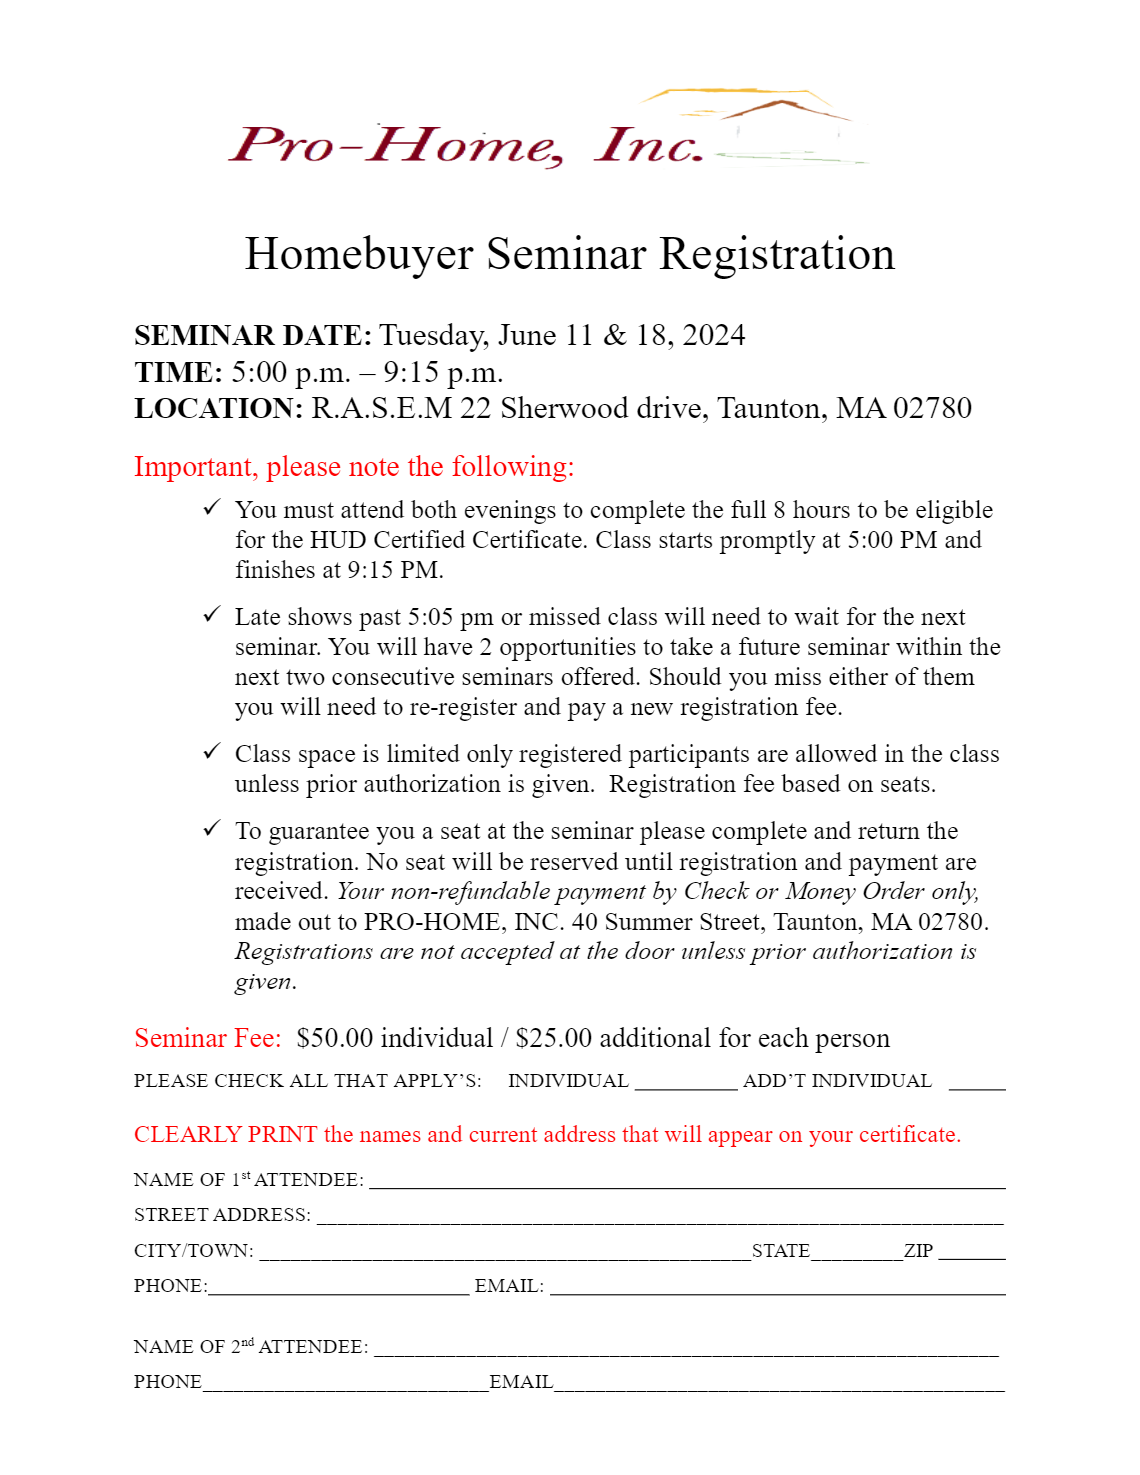 Homebuyer Seminar Registration SEMINAR DATE: Tuesday, June 11 & 18, 2024 TIME: 5:00 p.m. – 9:15 p.m. LOCATION: R.A.S.E.M 22 Sherwood drive, Taunton, MA 02780 Important, please note the following:  You must attend both evenings to complete the full 8 hours to be eligible for the HUD Certified Certificate. Class starts promptly at 5:00 PM and finishes at 9:15 PM.  Late shows past 5:05 pm or missed class will need to wait for the next seminar. You will have 2 opportunities to take a future seminar within the next two consecutive seminars offered. Should you miss either of them you will need to re-register and pay a new registration fee.  Class space is limited only registered participants are allowed in the class unless prior authorization is given. Registration fee based on seats.  To guarantee you a seat at the seminar please complete and return the registration. No seat will be reserved until registration and payment are received. Your non-refundable payment by Check or Money Order only, made out to PRO-HOME, INC. 40 Summer Street, Taunton, MA 02780. Registrations are not accepted at the door unless prior authorization is given. Seminar Fee: $50.00 individual / $25.00 additional for each person 